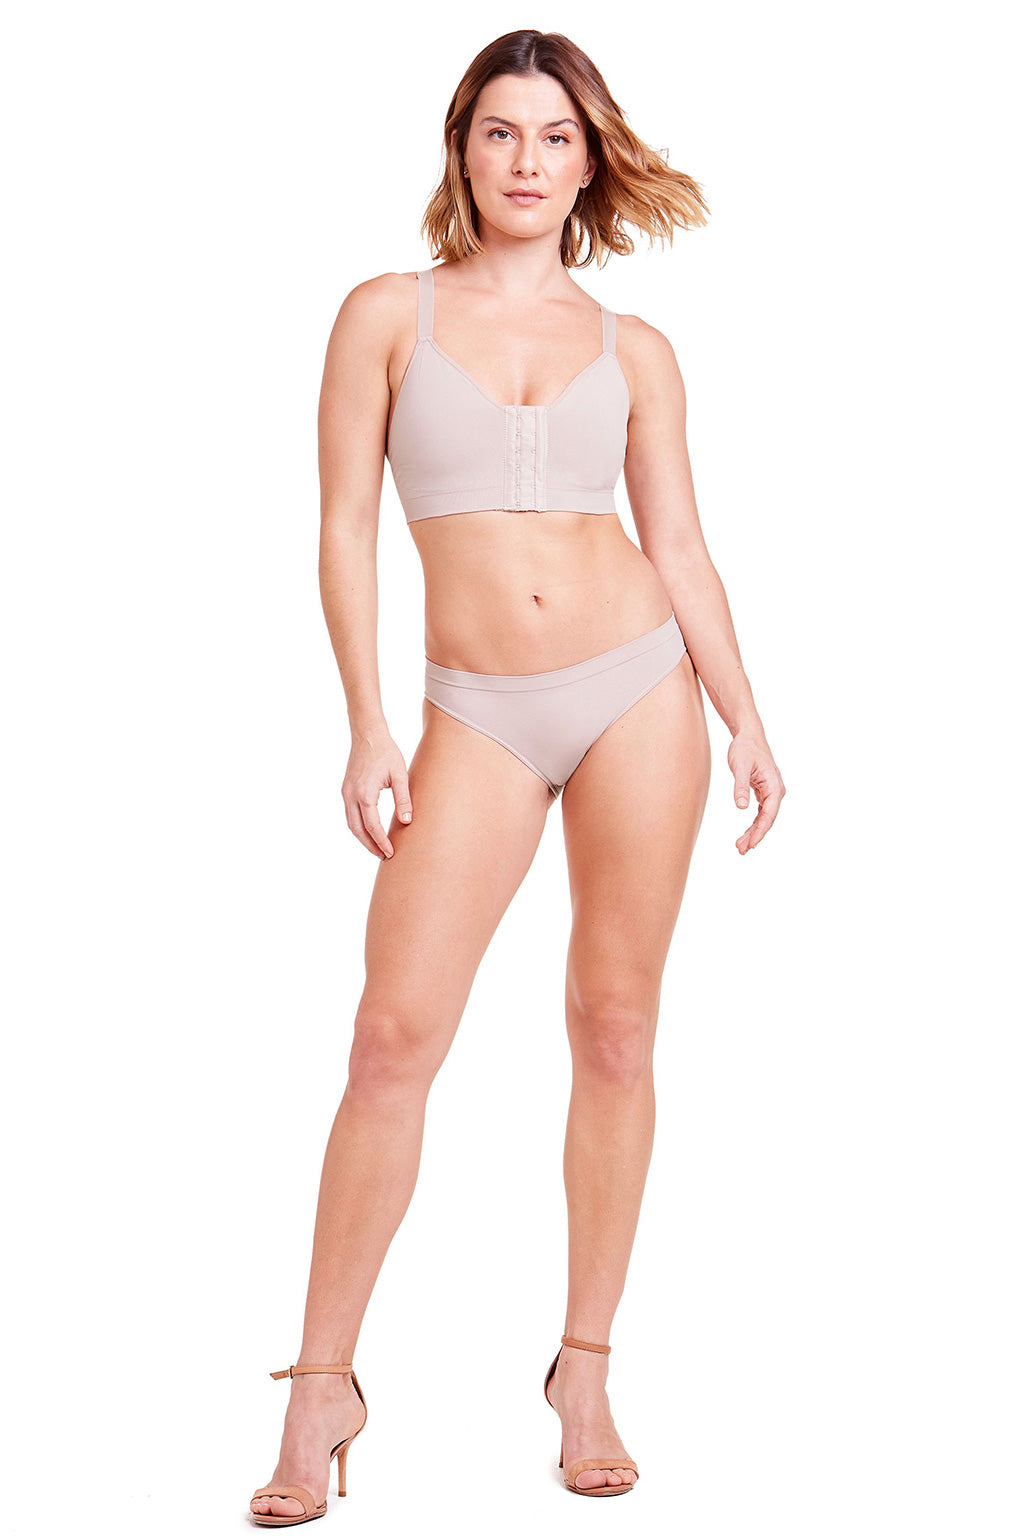 Plie CONTROL Aesthetic Bra with Front Opening